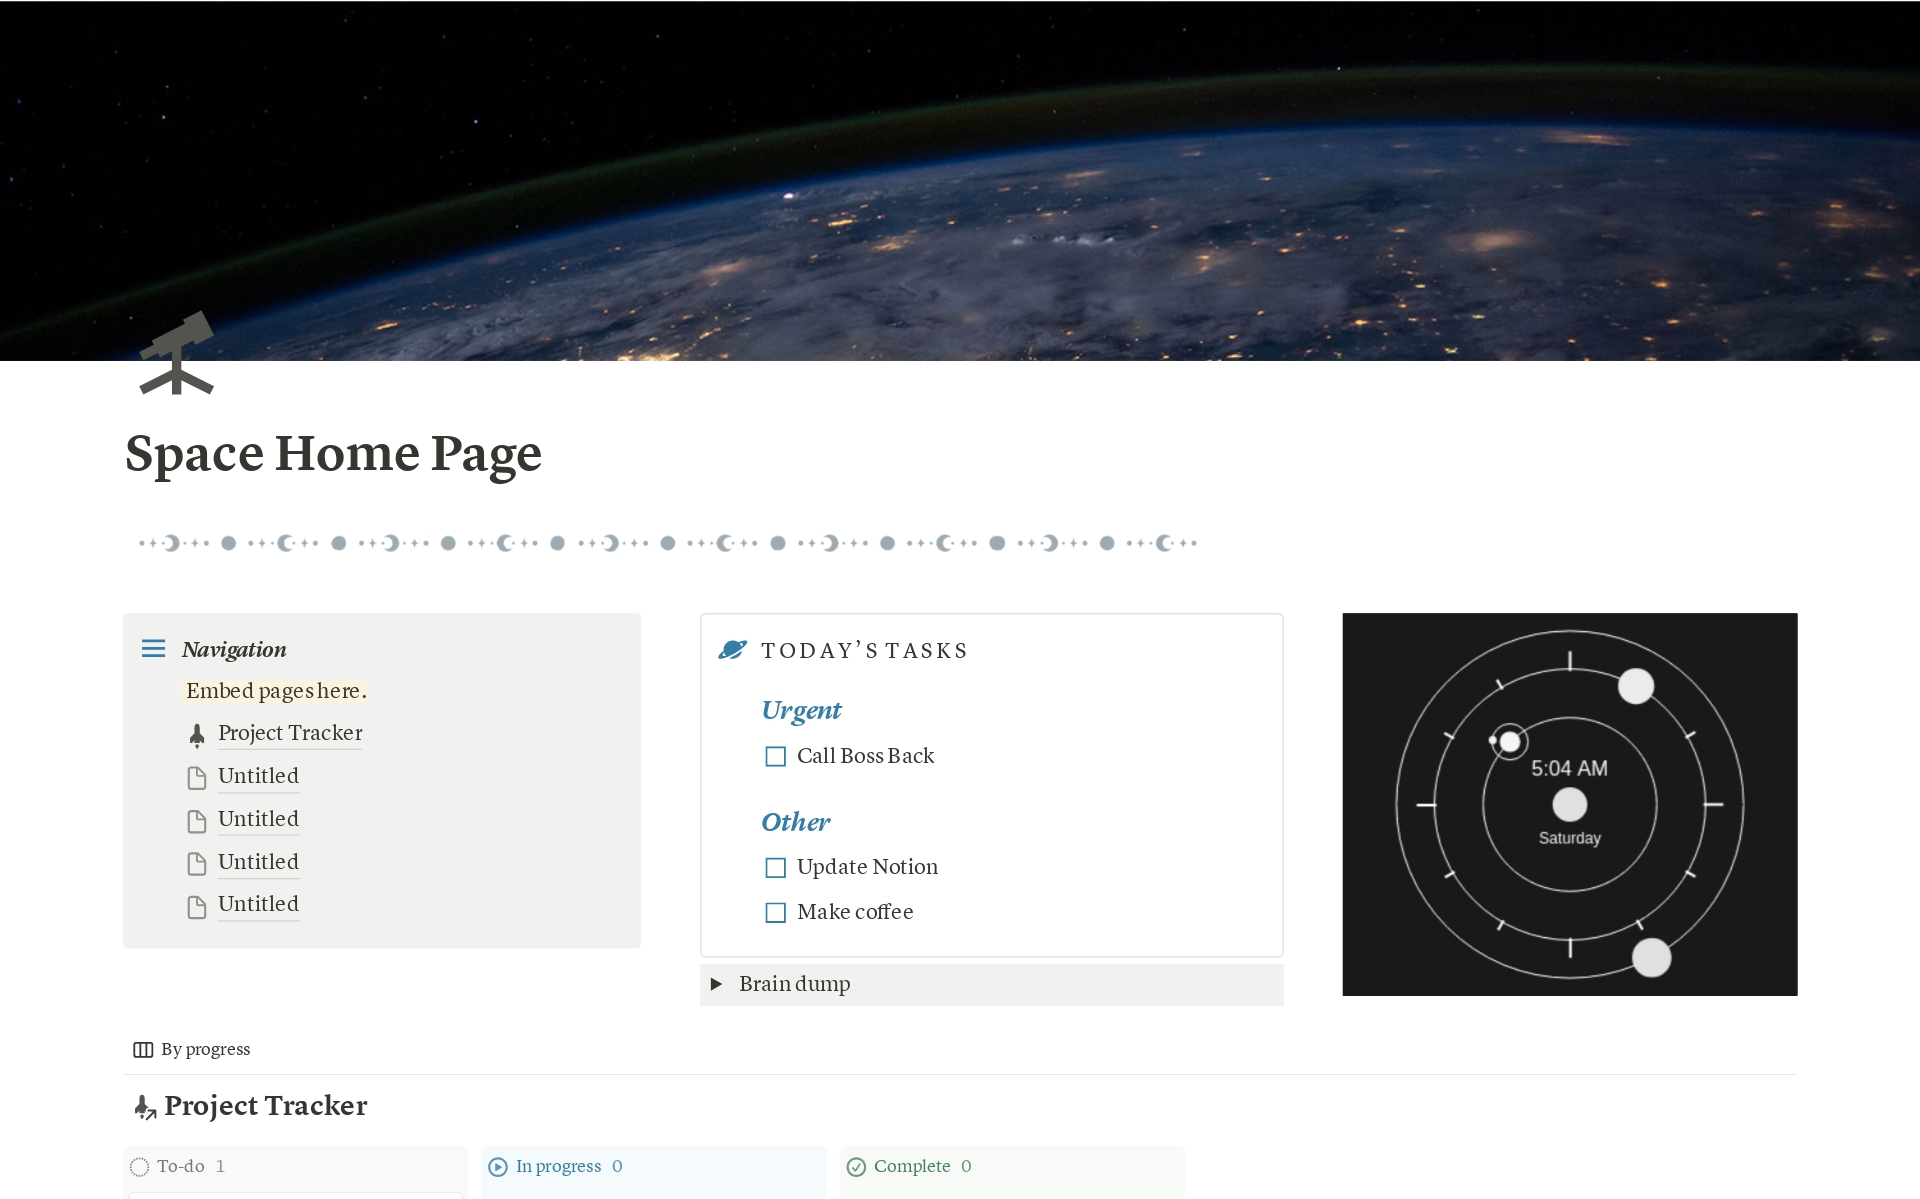 A sleek space-themed home page